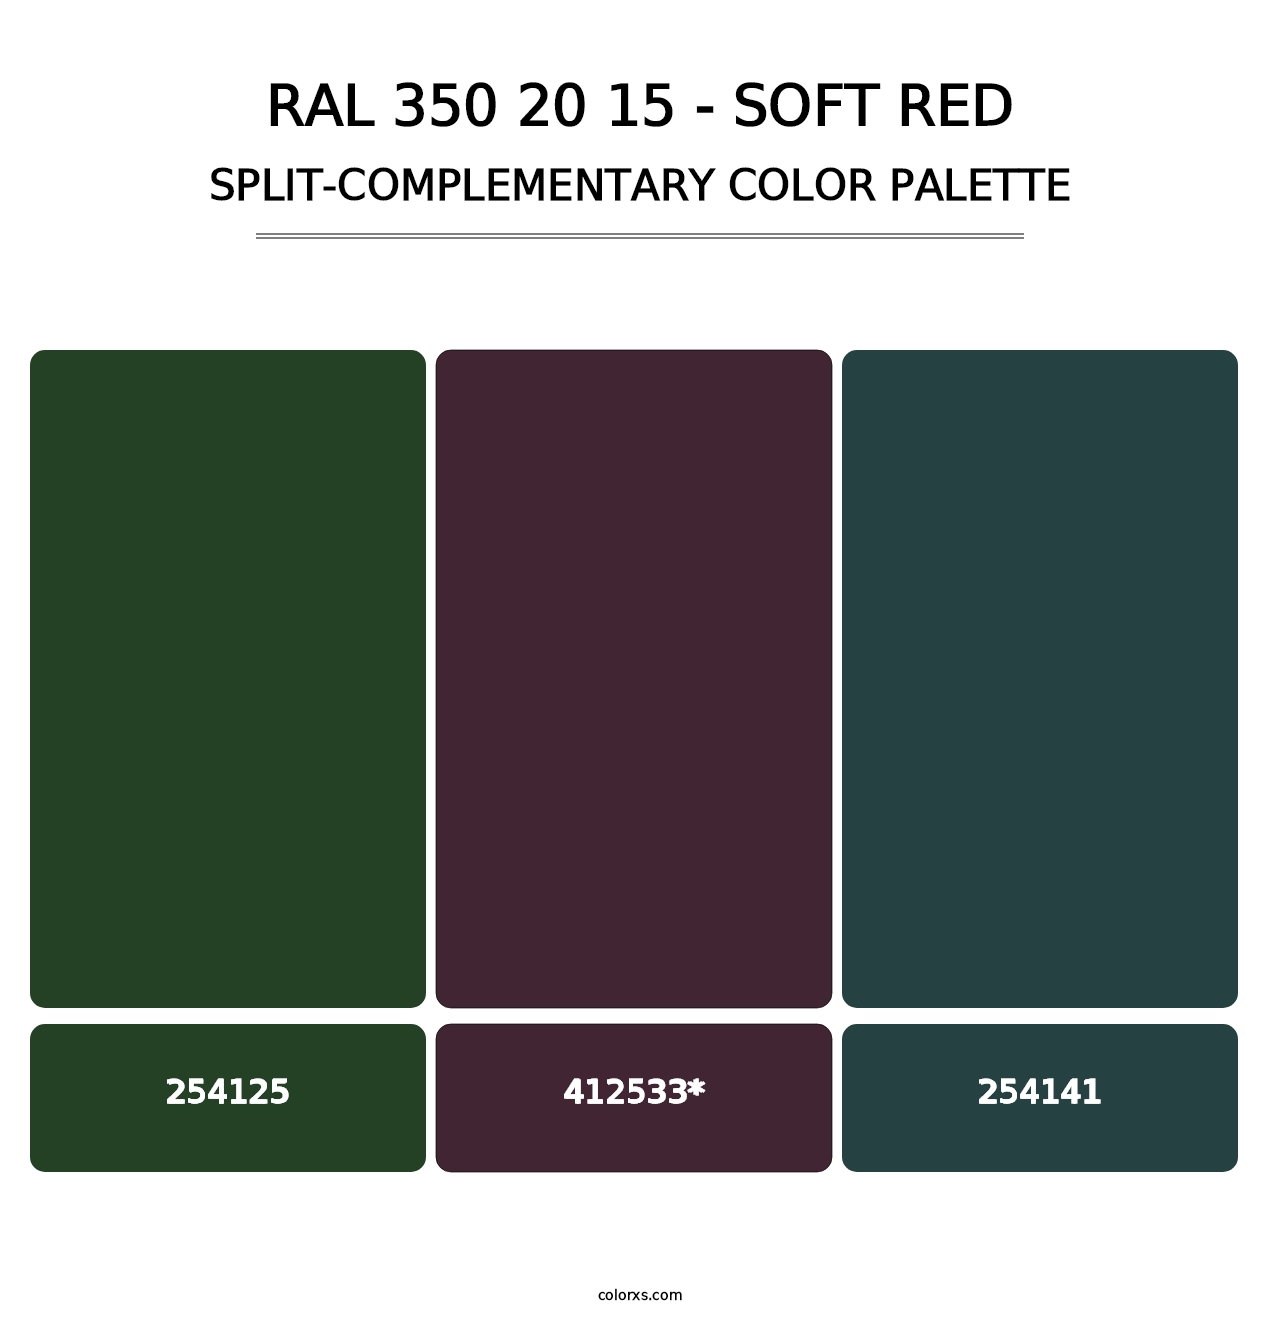 RAL 350 20 15 - Soft Red - Split-Complementary Color Palette